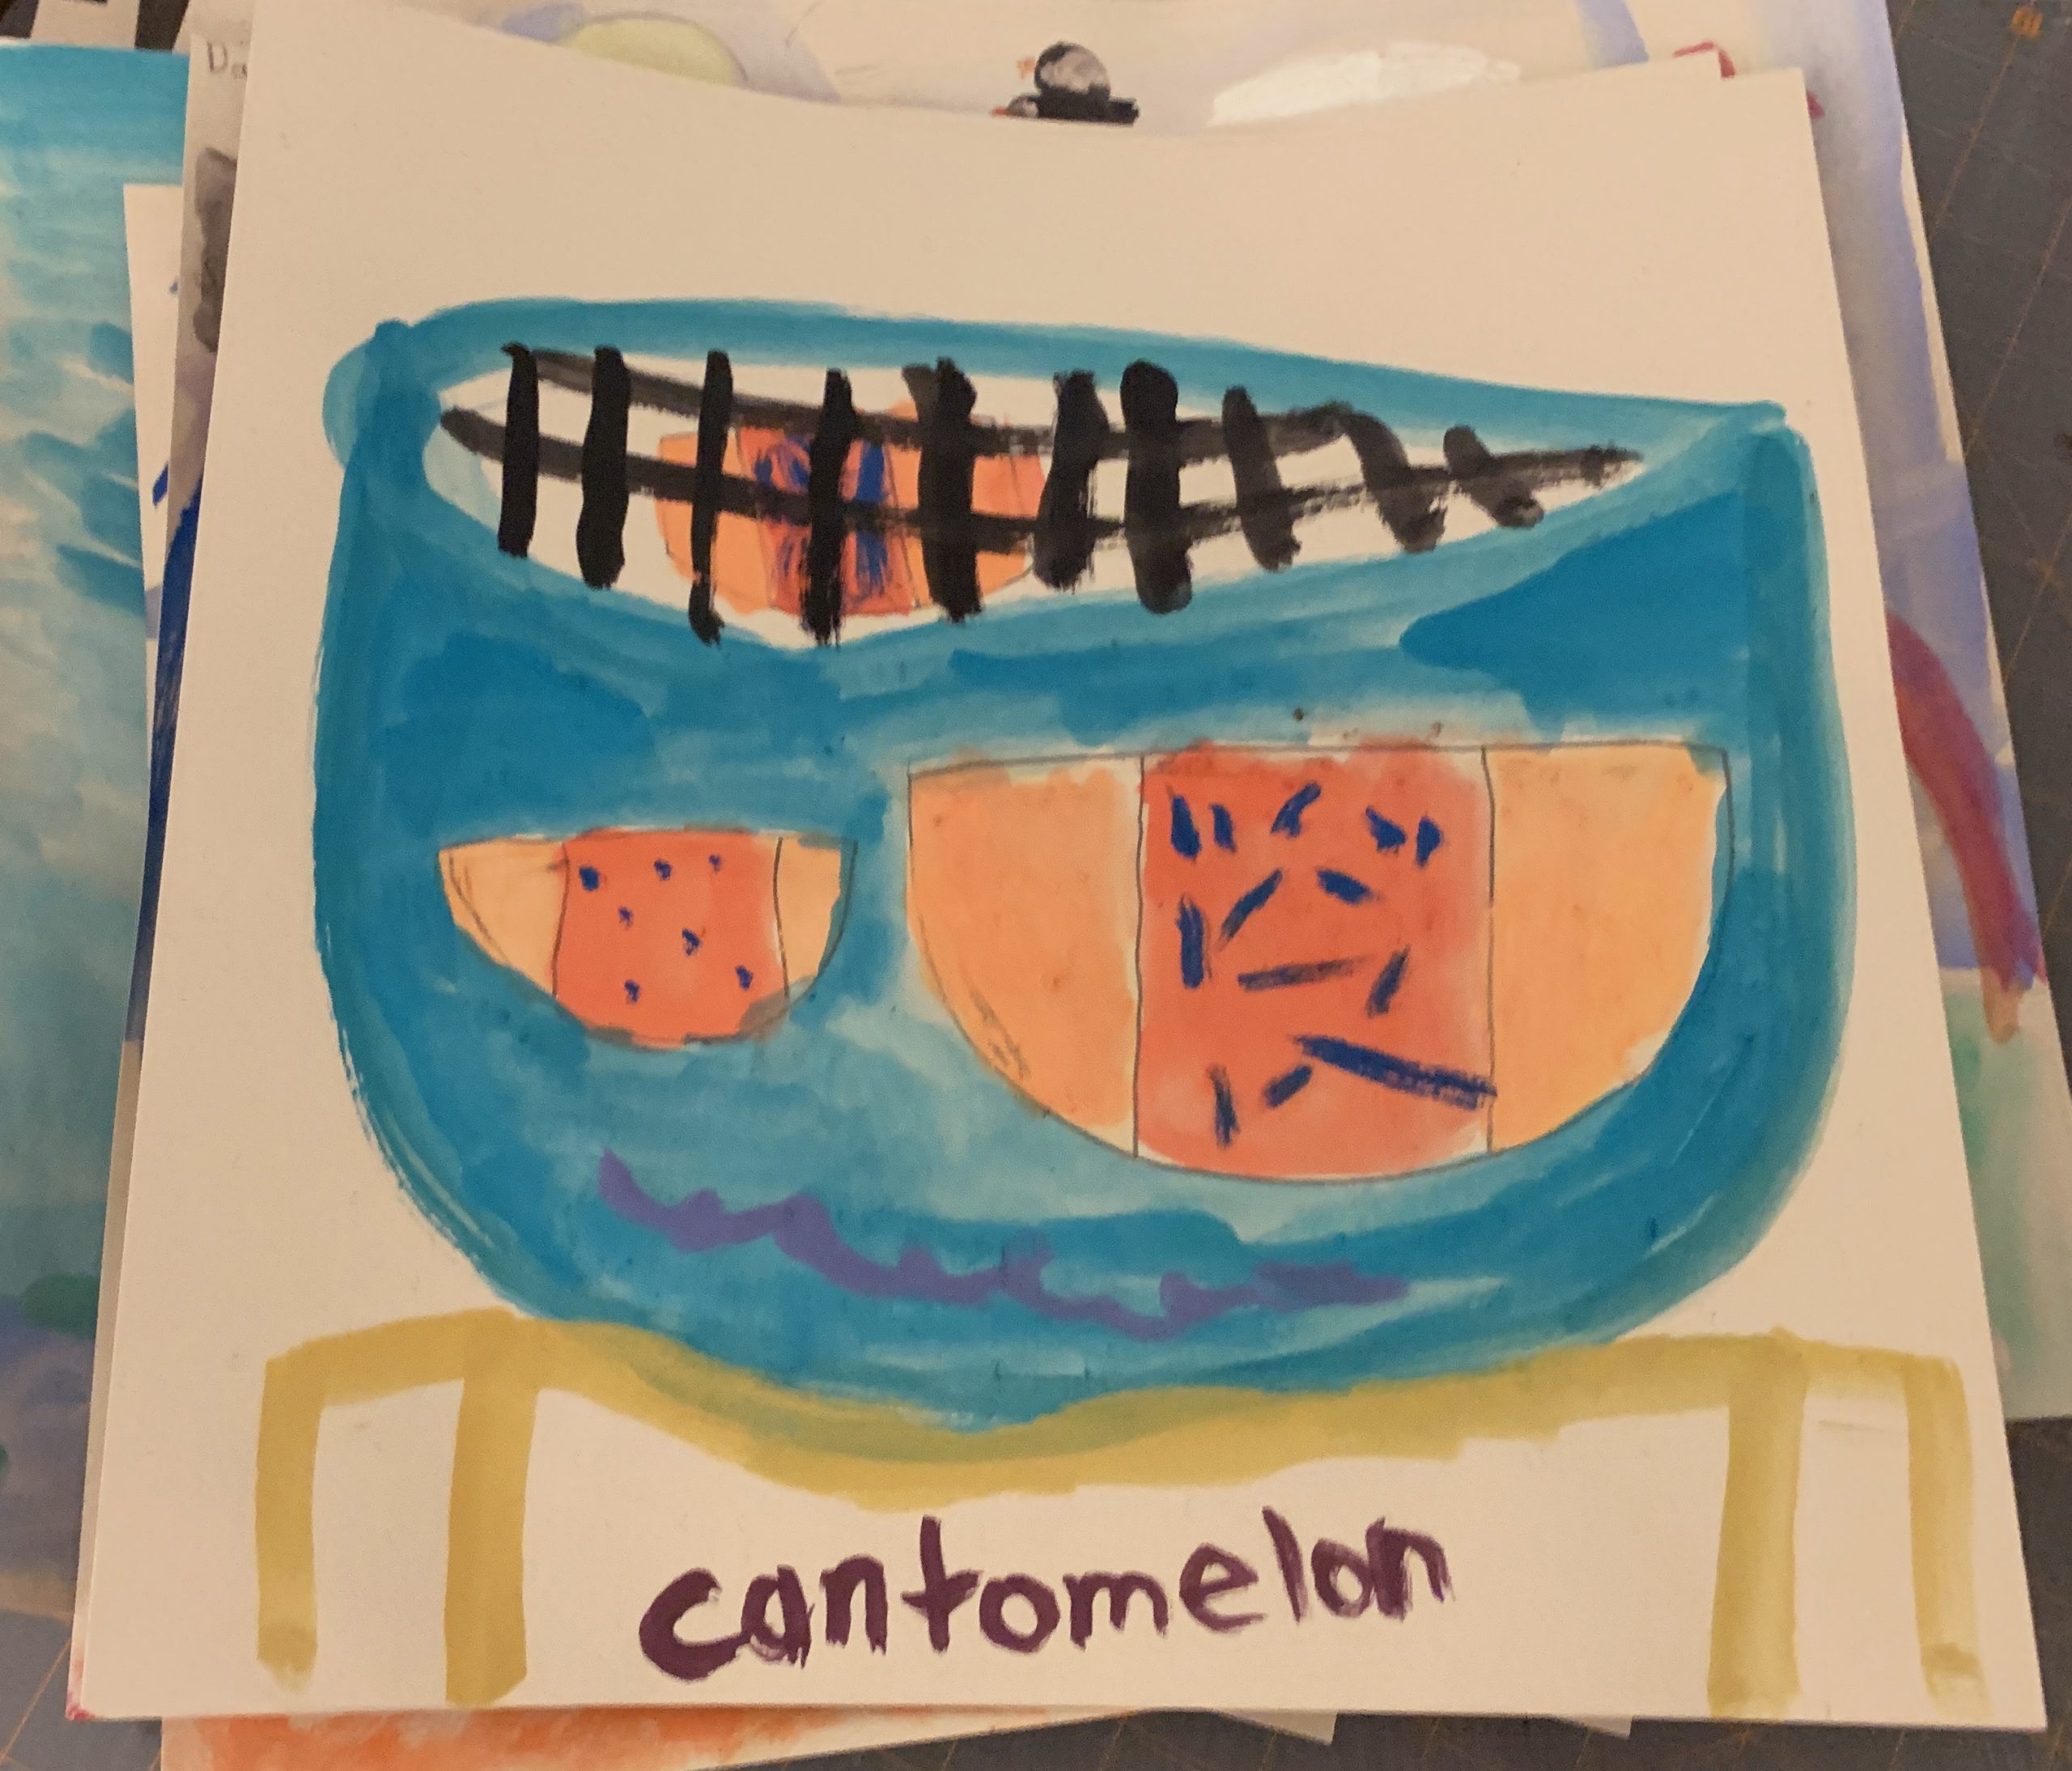 A child's drawing of a cantomelon shows two half-moon shapes inside of a blue watermelon.